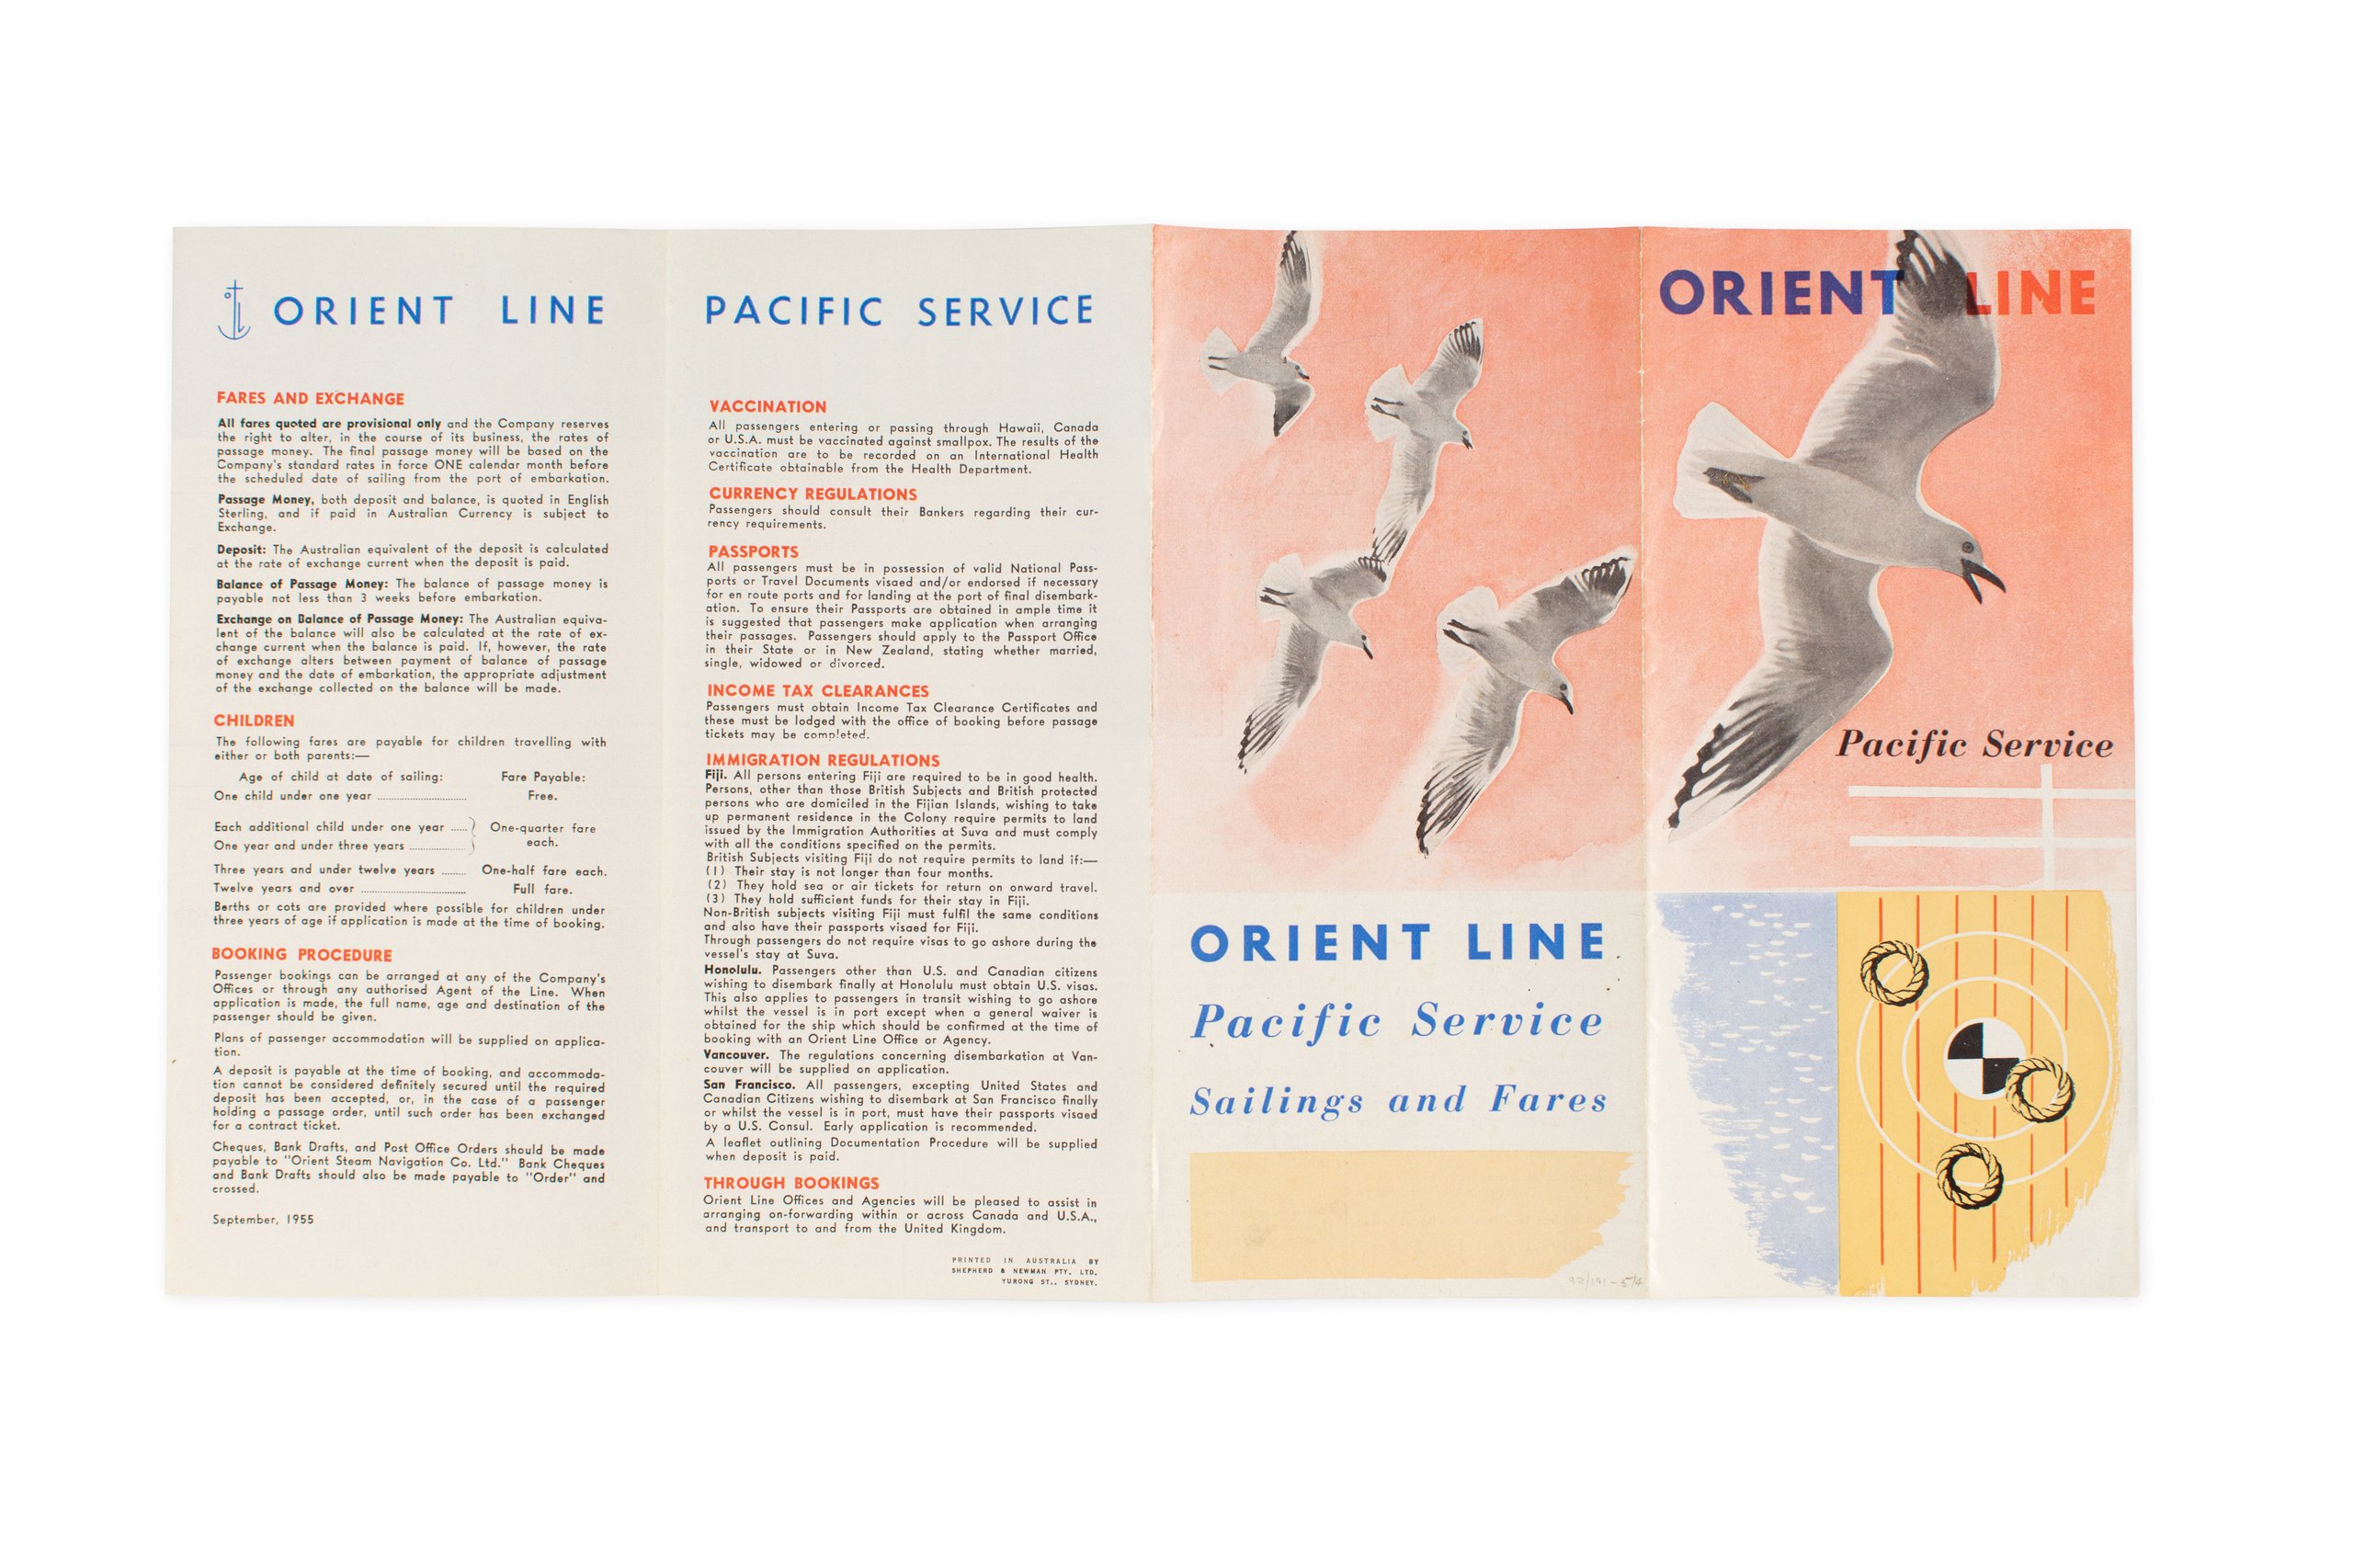 Design work for Orient Line by Dahl and Geoffrey Collings